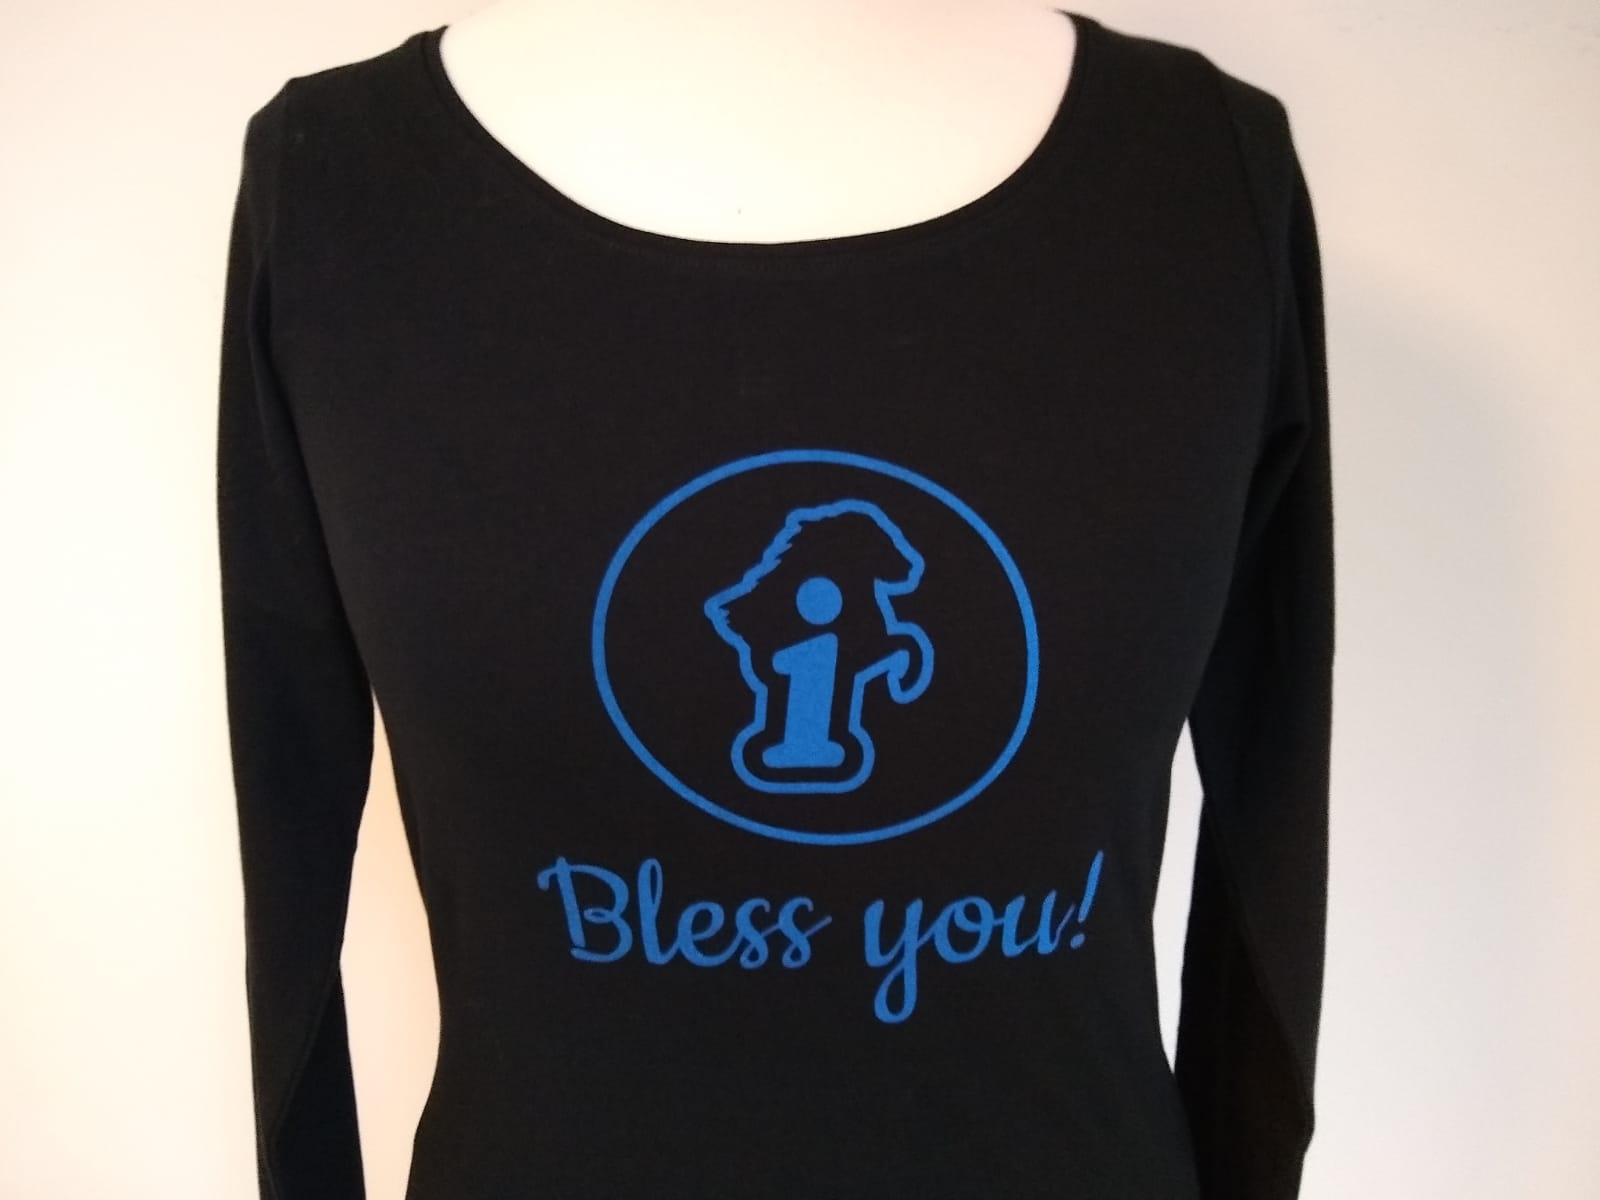 ”Bless you” Isibless T-shirts and bags!